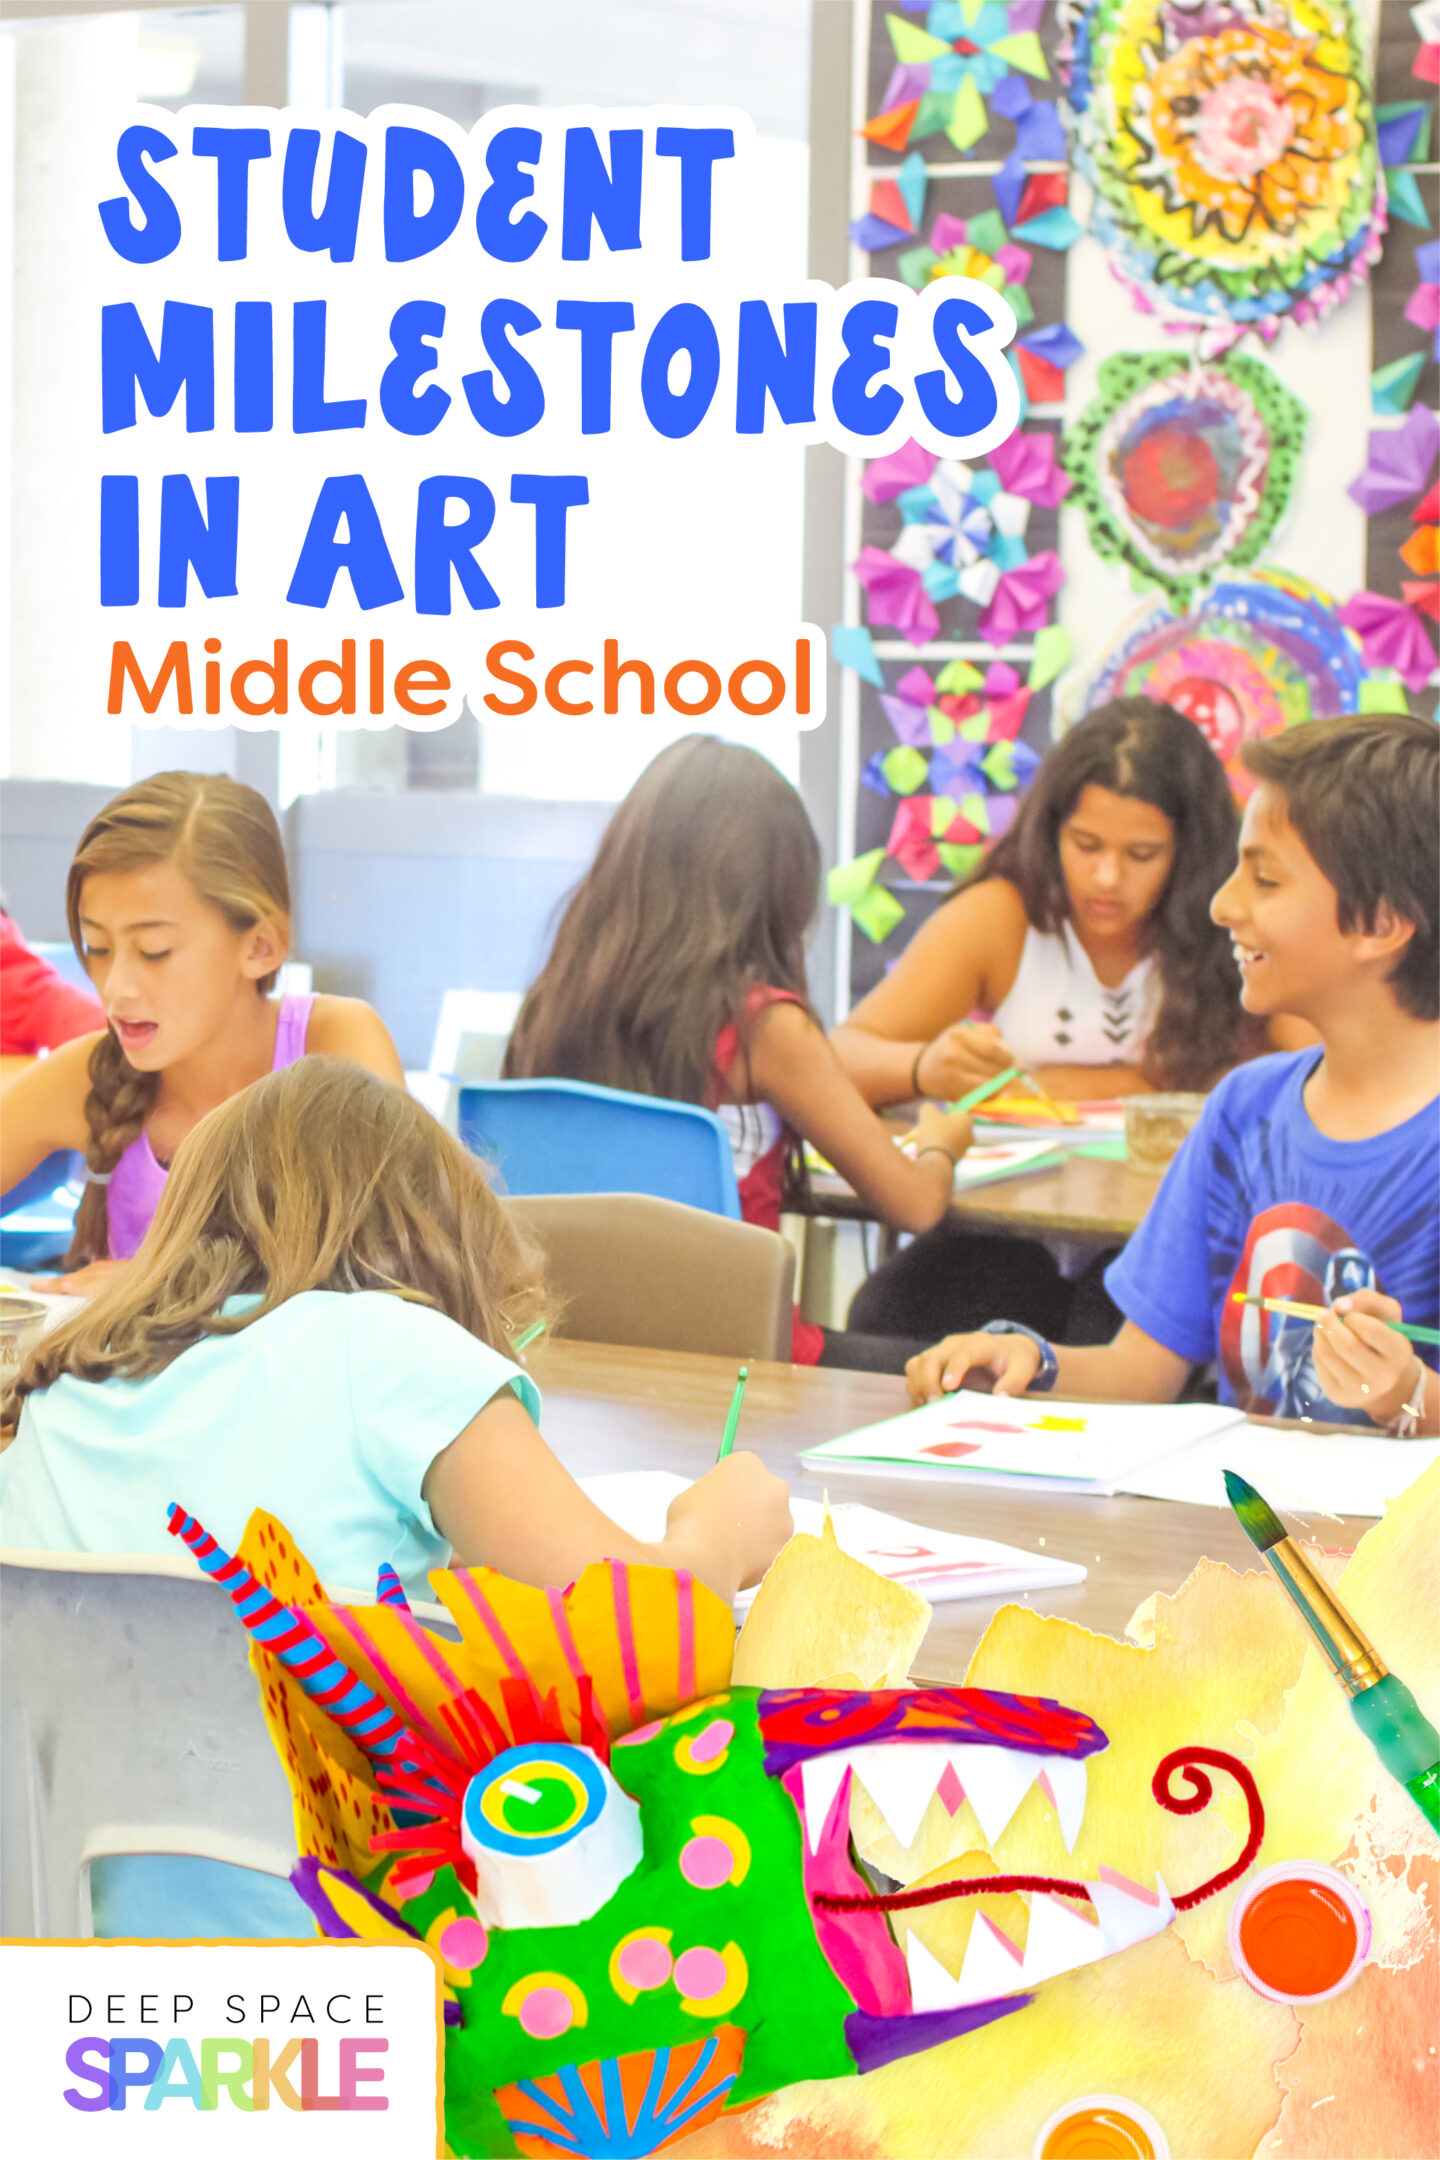 Student Milestones in Art for middle school students in the art room and classroom for 6th, 7th and 8th graders